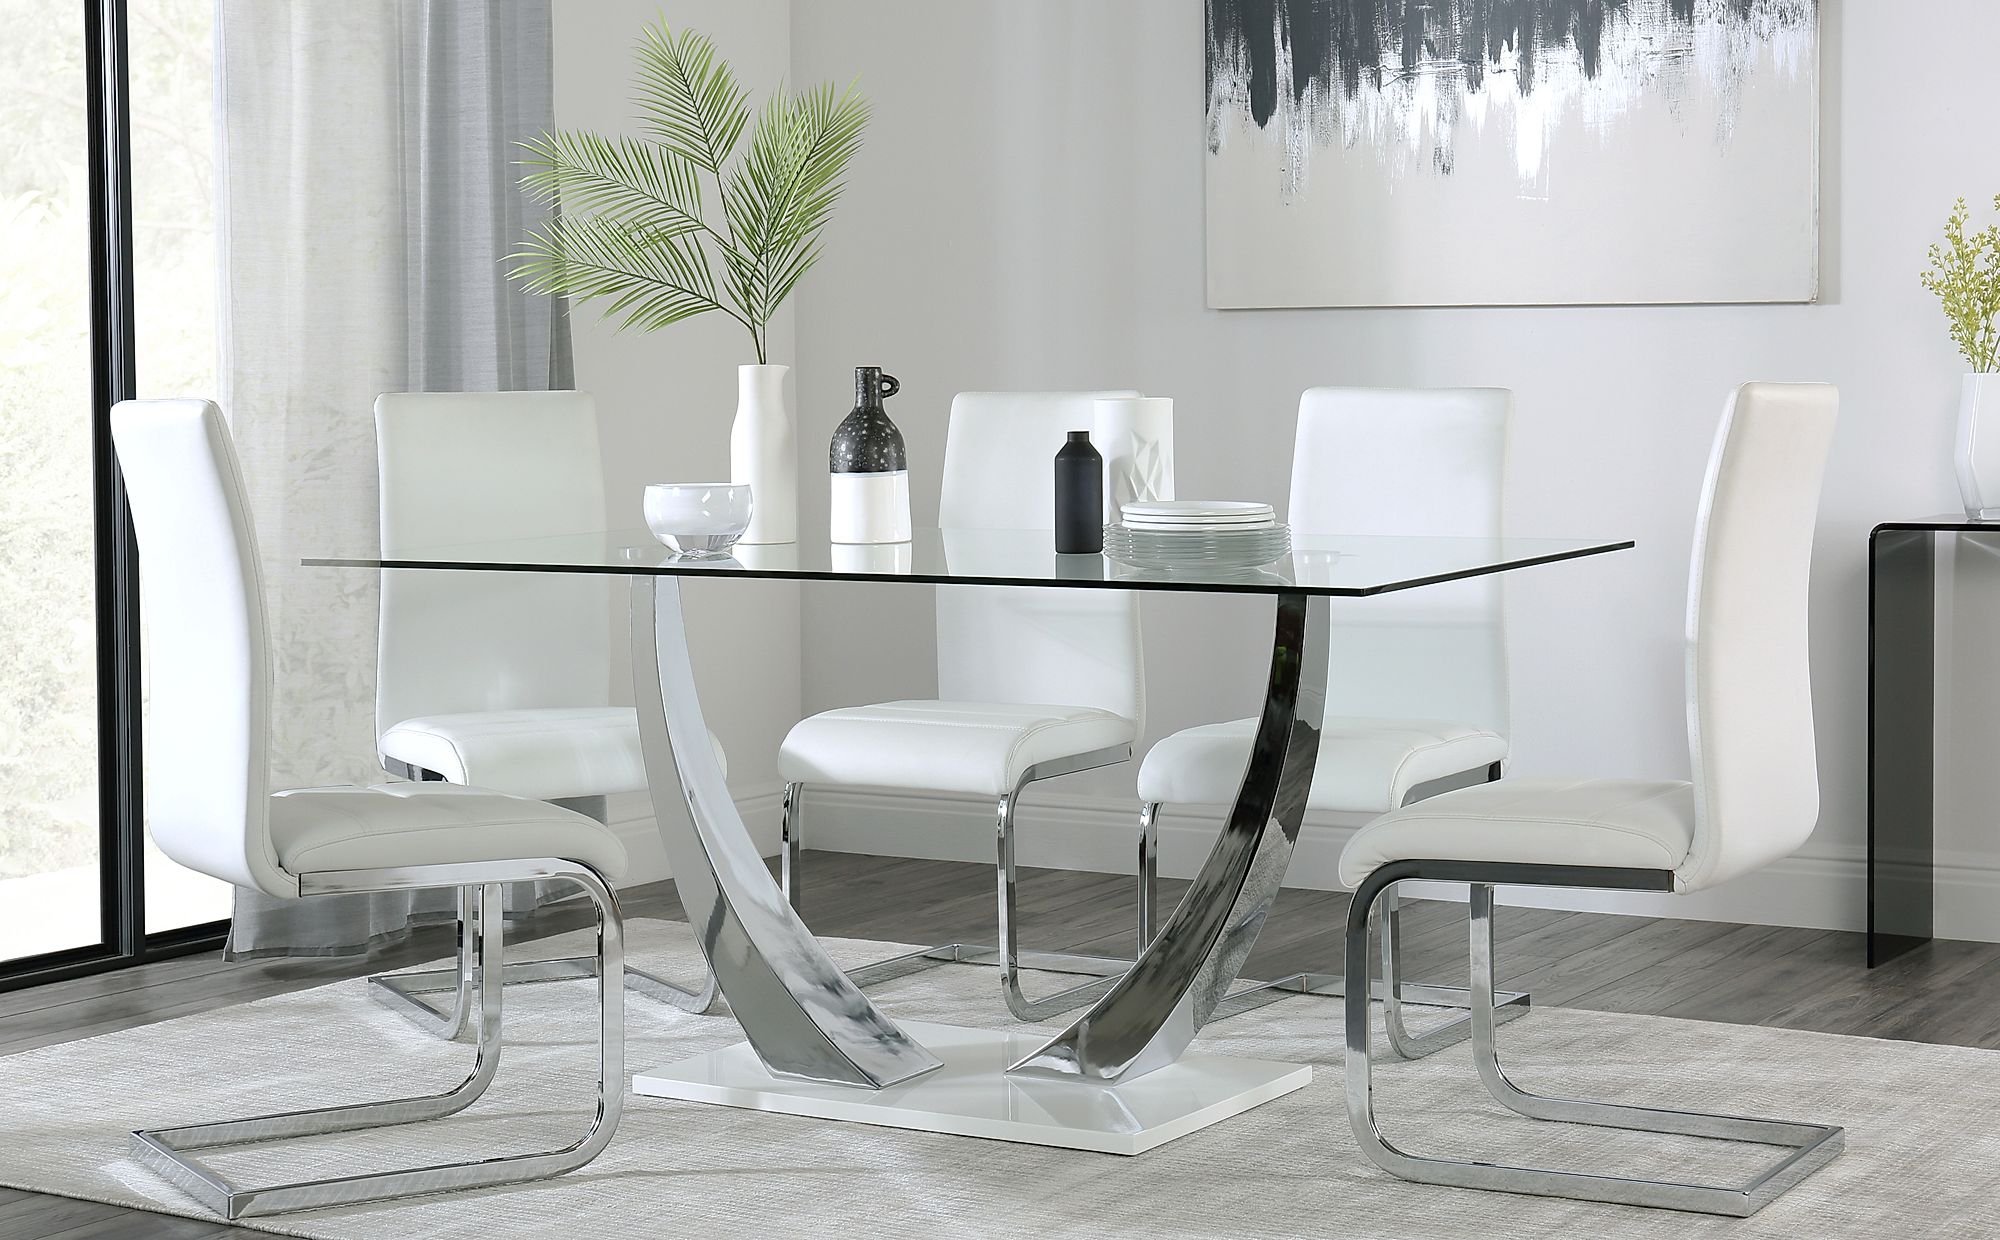 chrome and glass living room furniture